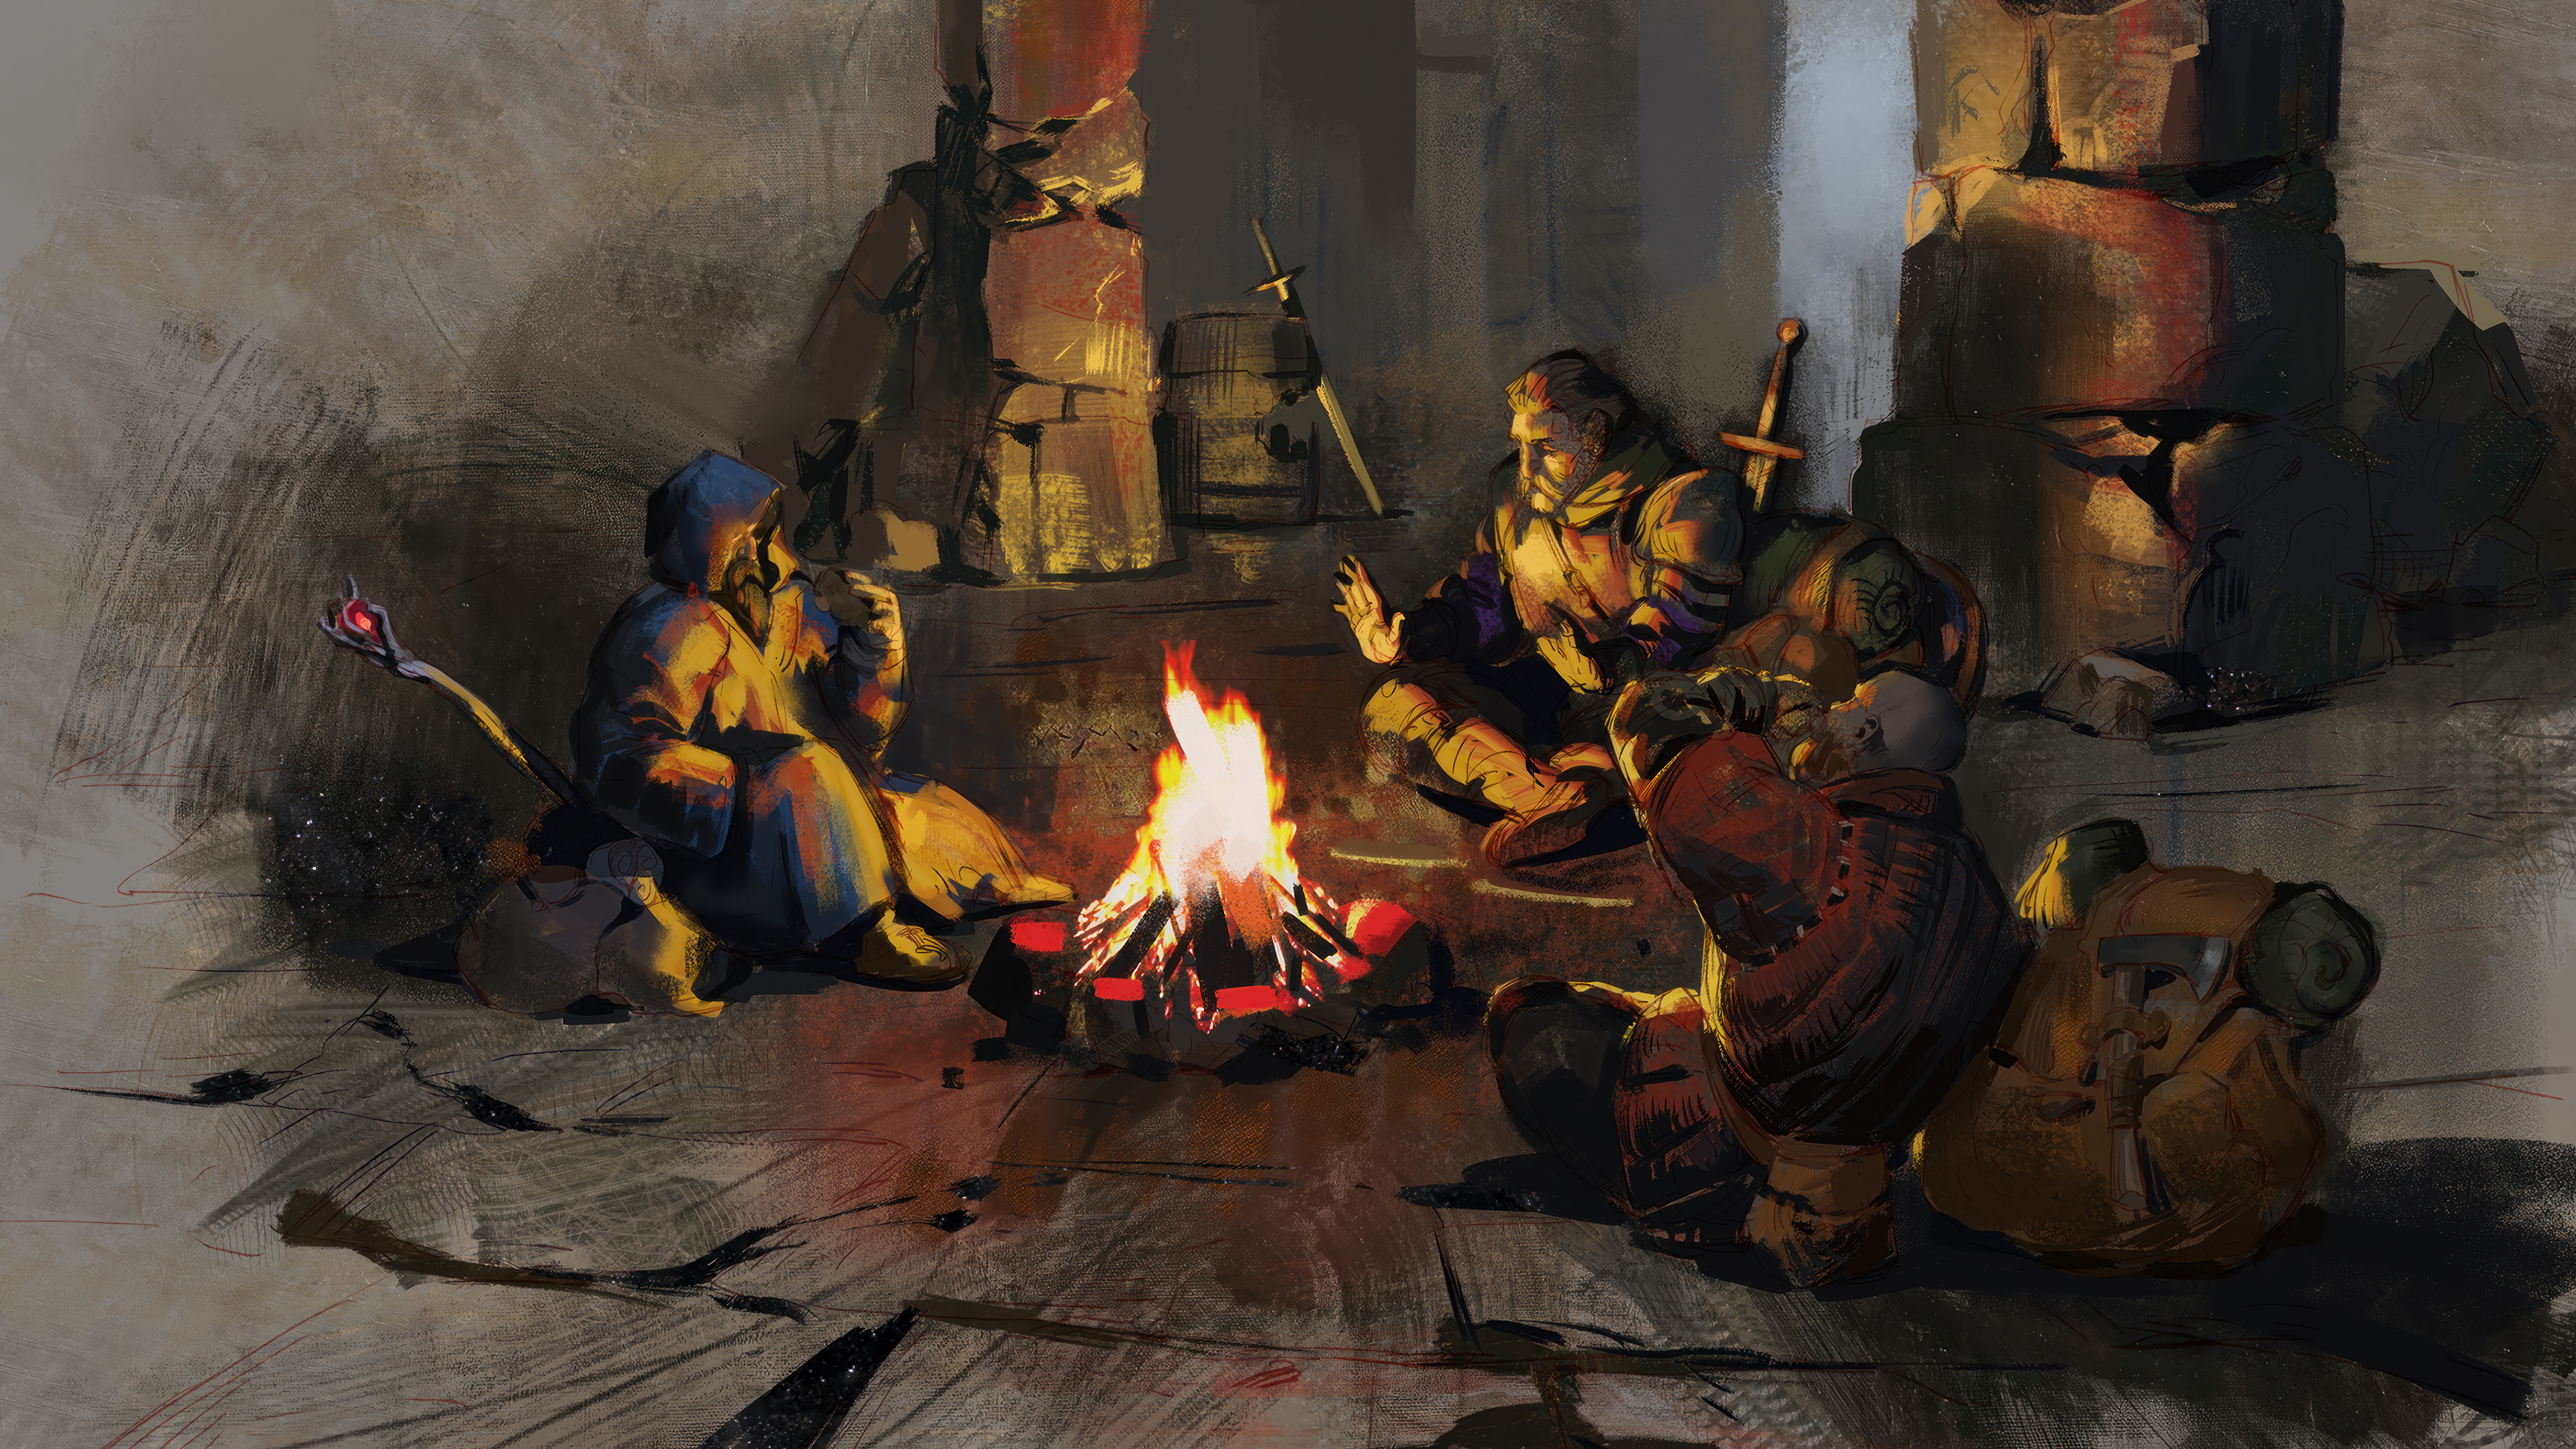 HD desktop wallpaper of adventurers resting by a campfire from the game Dark and Darker.